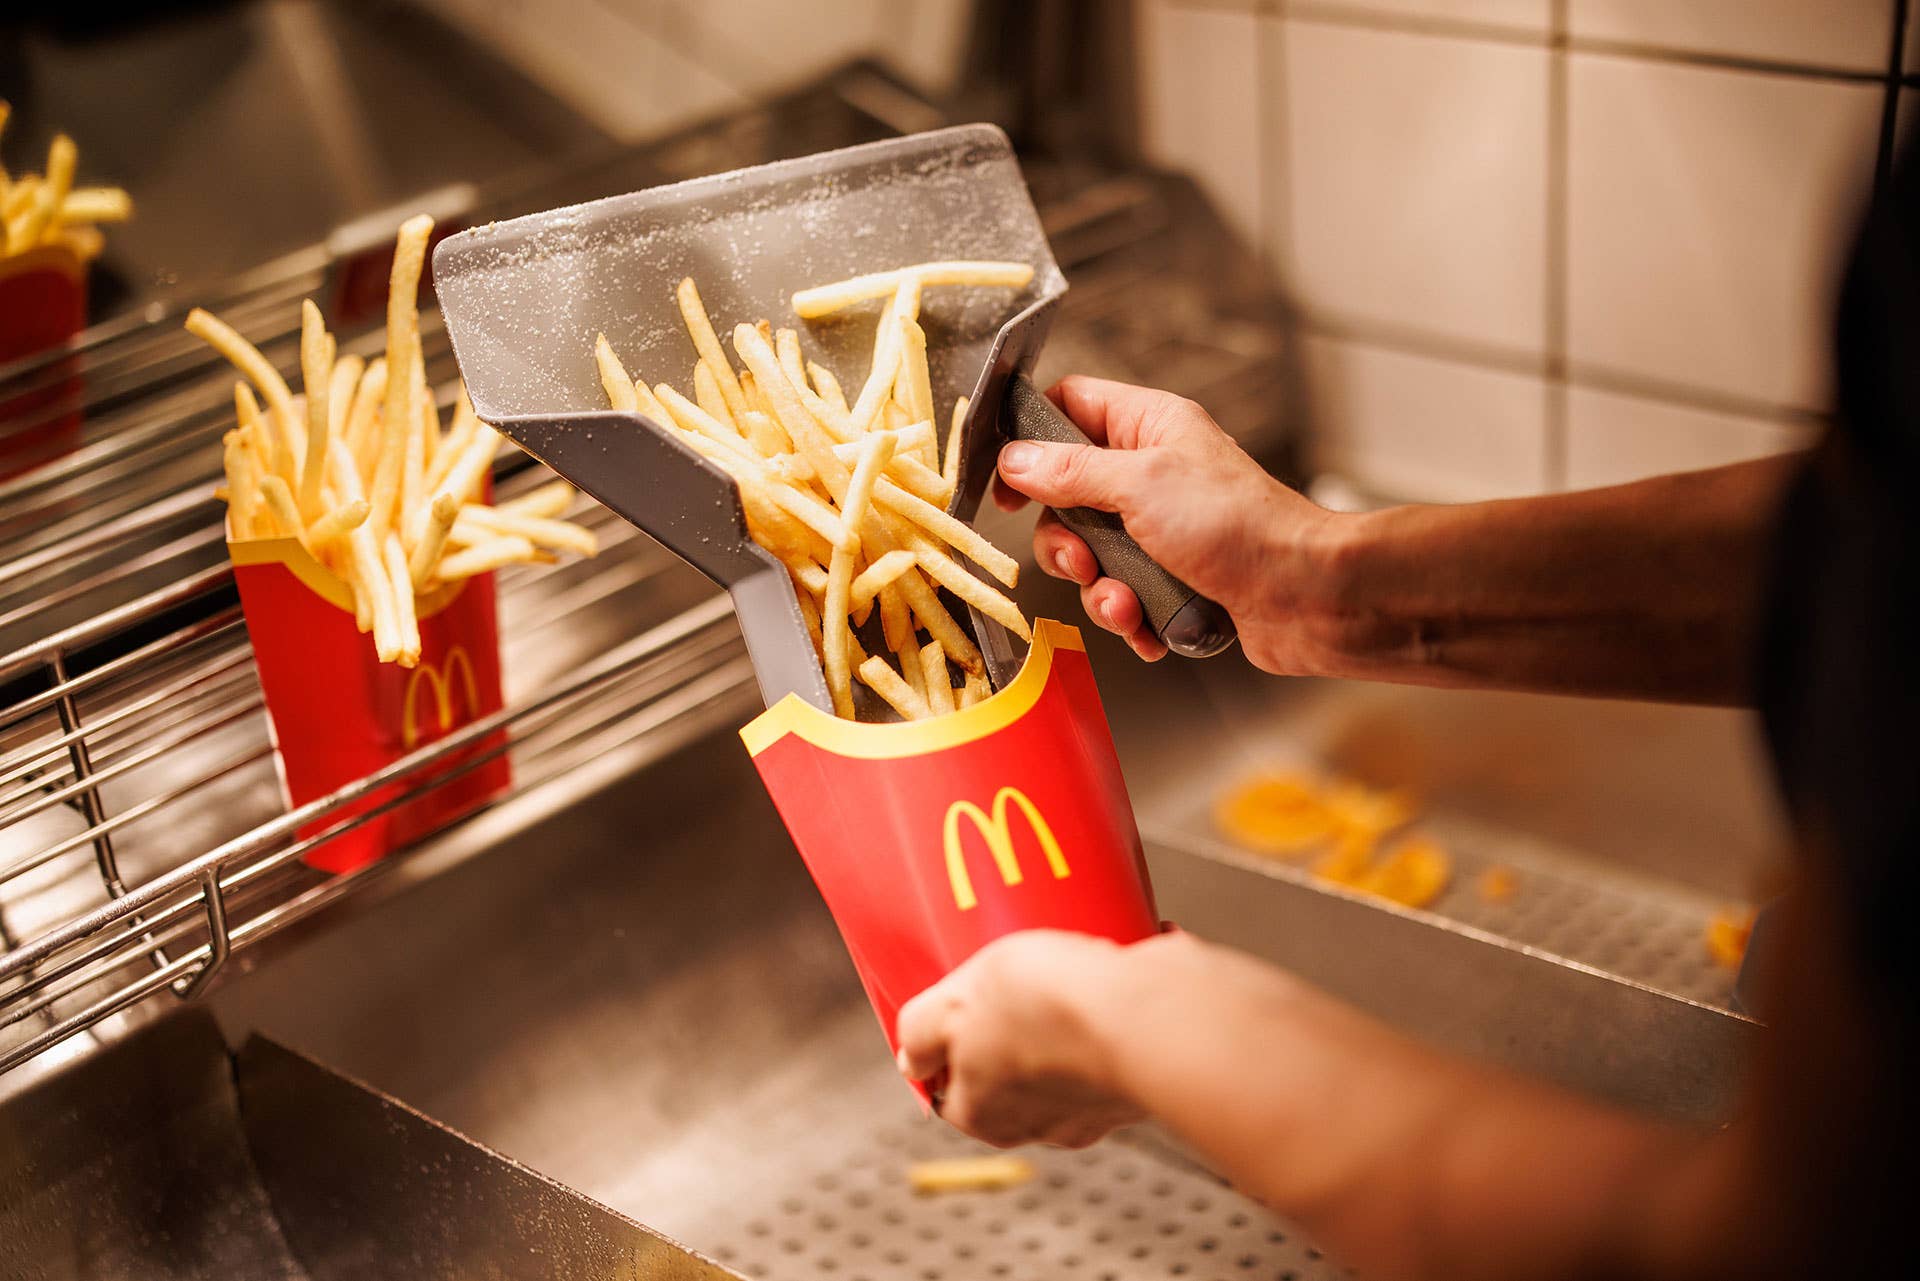 An employee fills carton with McDonald's French fries.